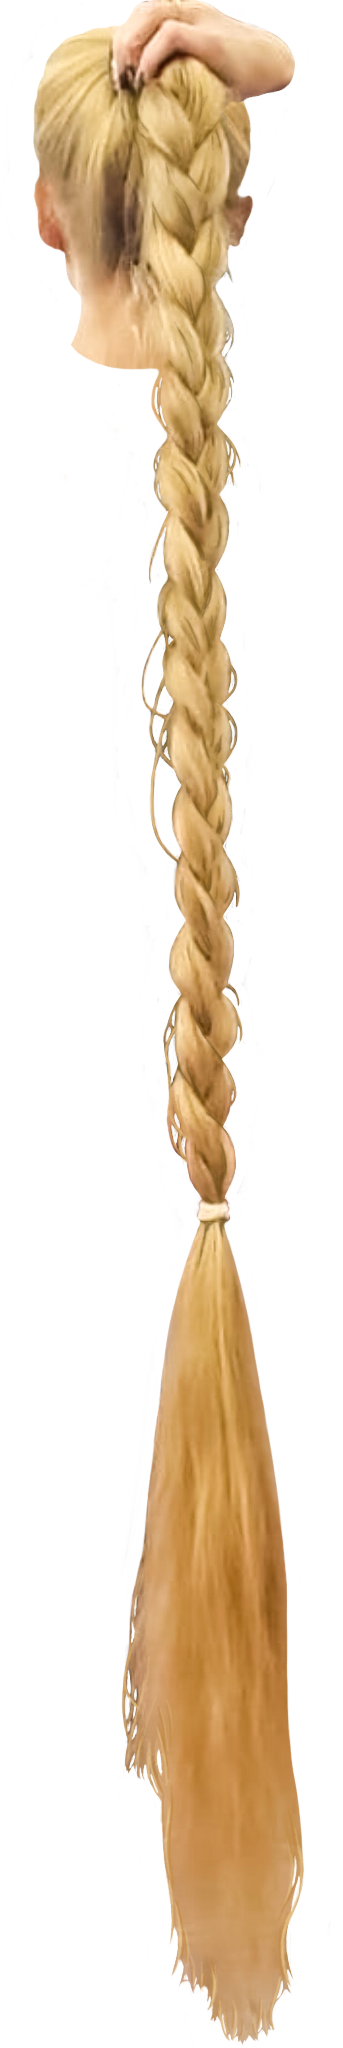 Braiding PNG Background